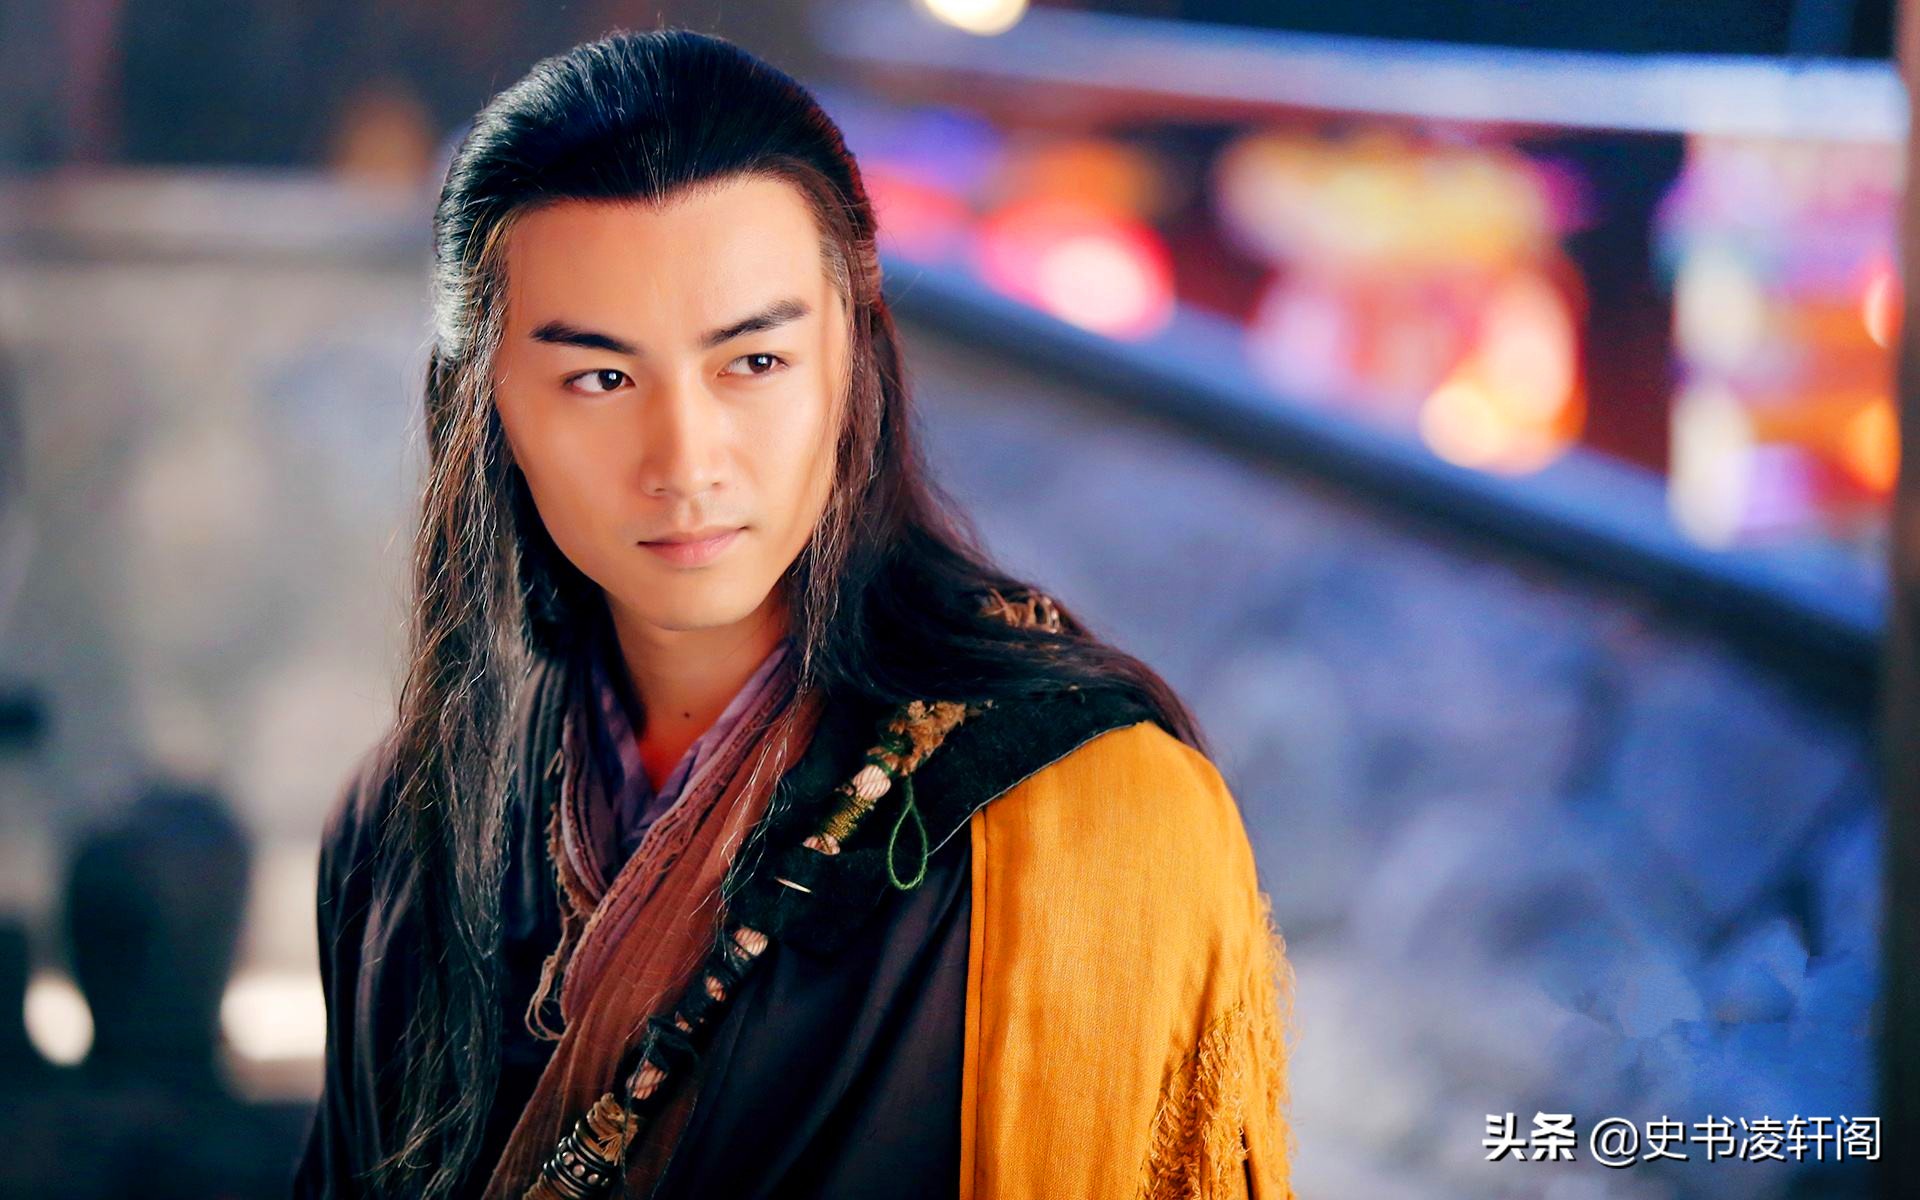 guo jing played by